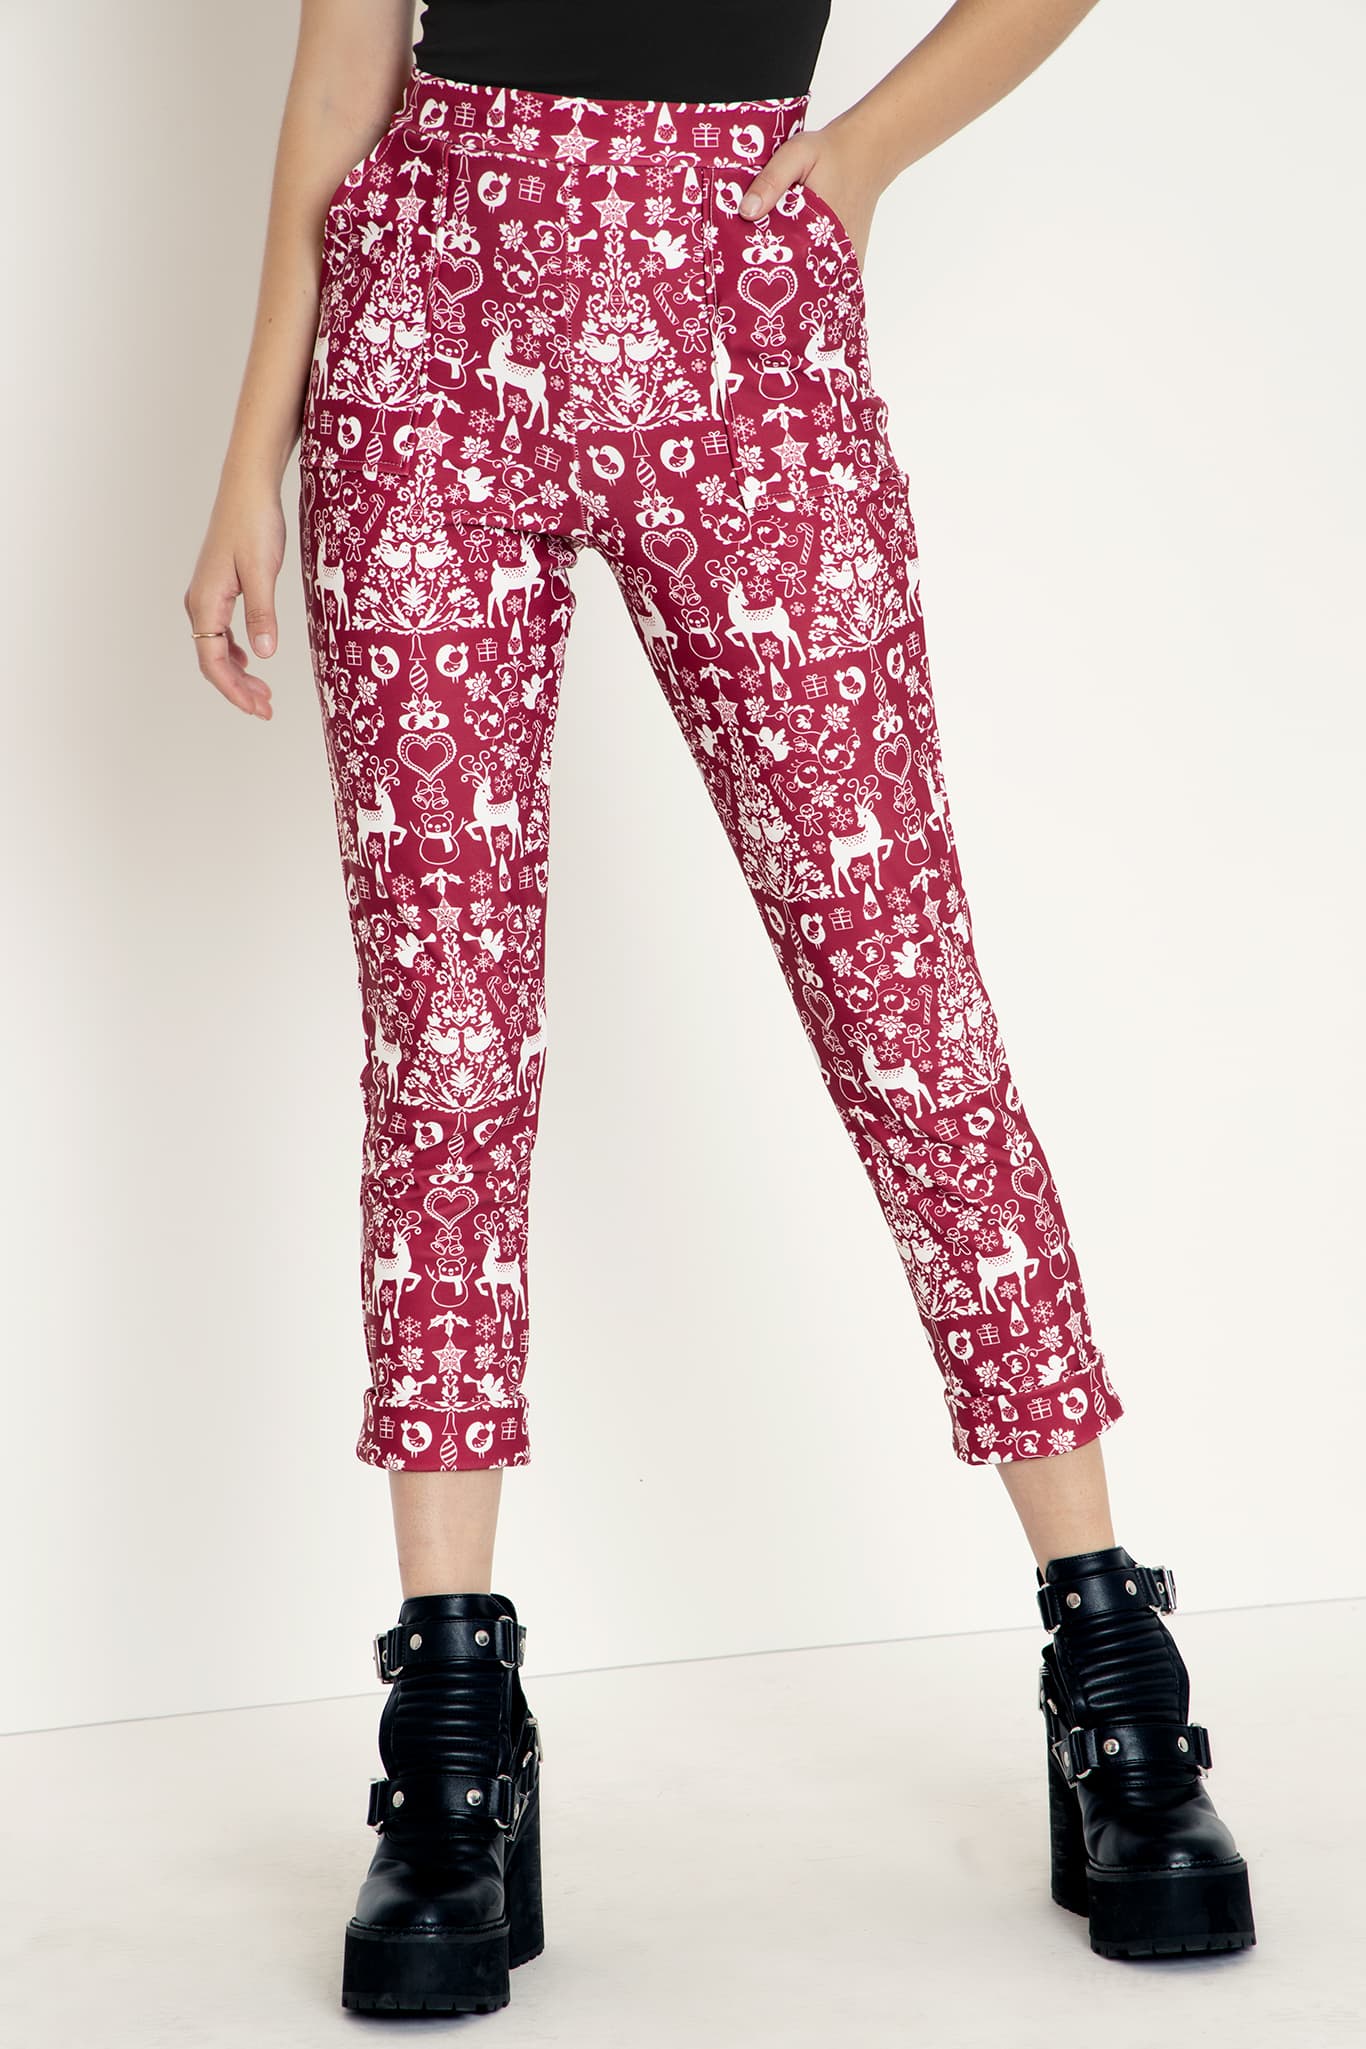 Anthropologie Has the Checkered Trousers We Need for Fall | Us Weekly